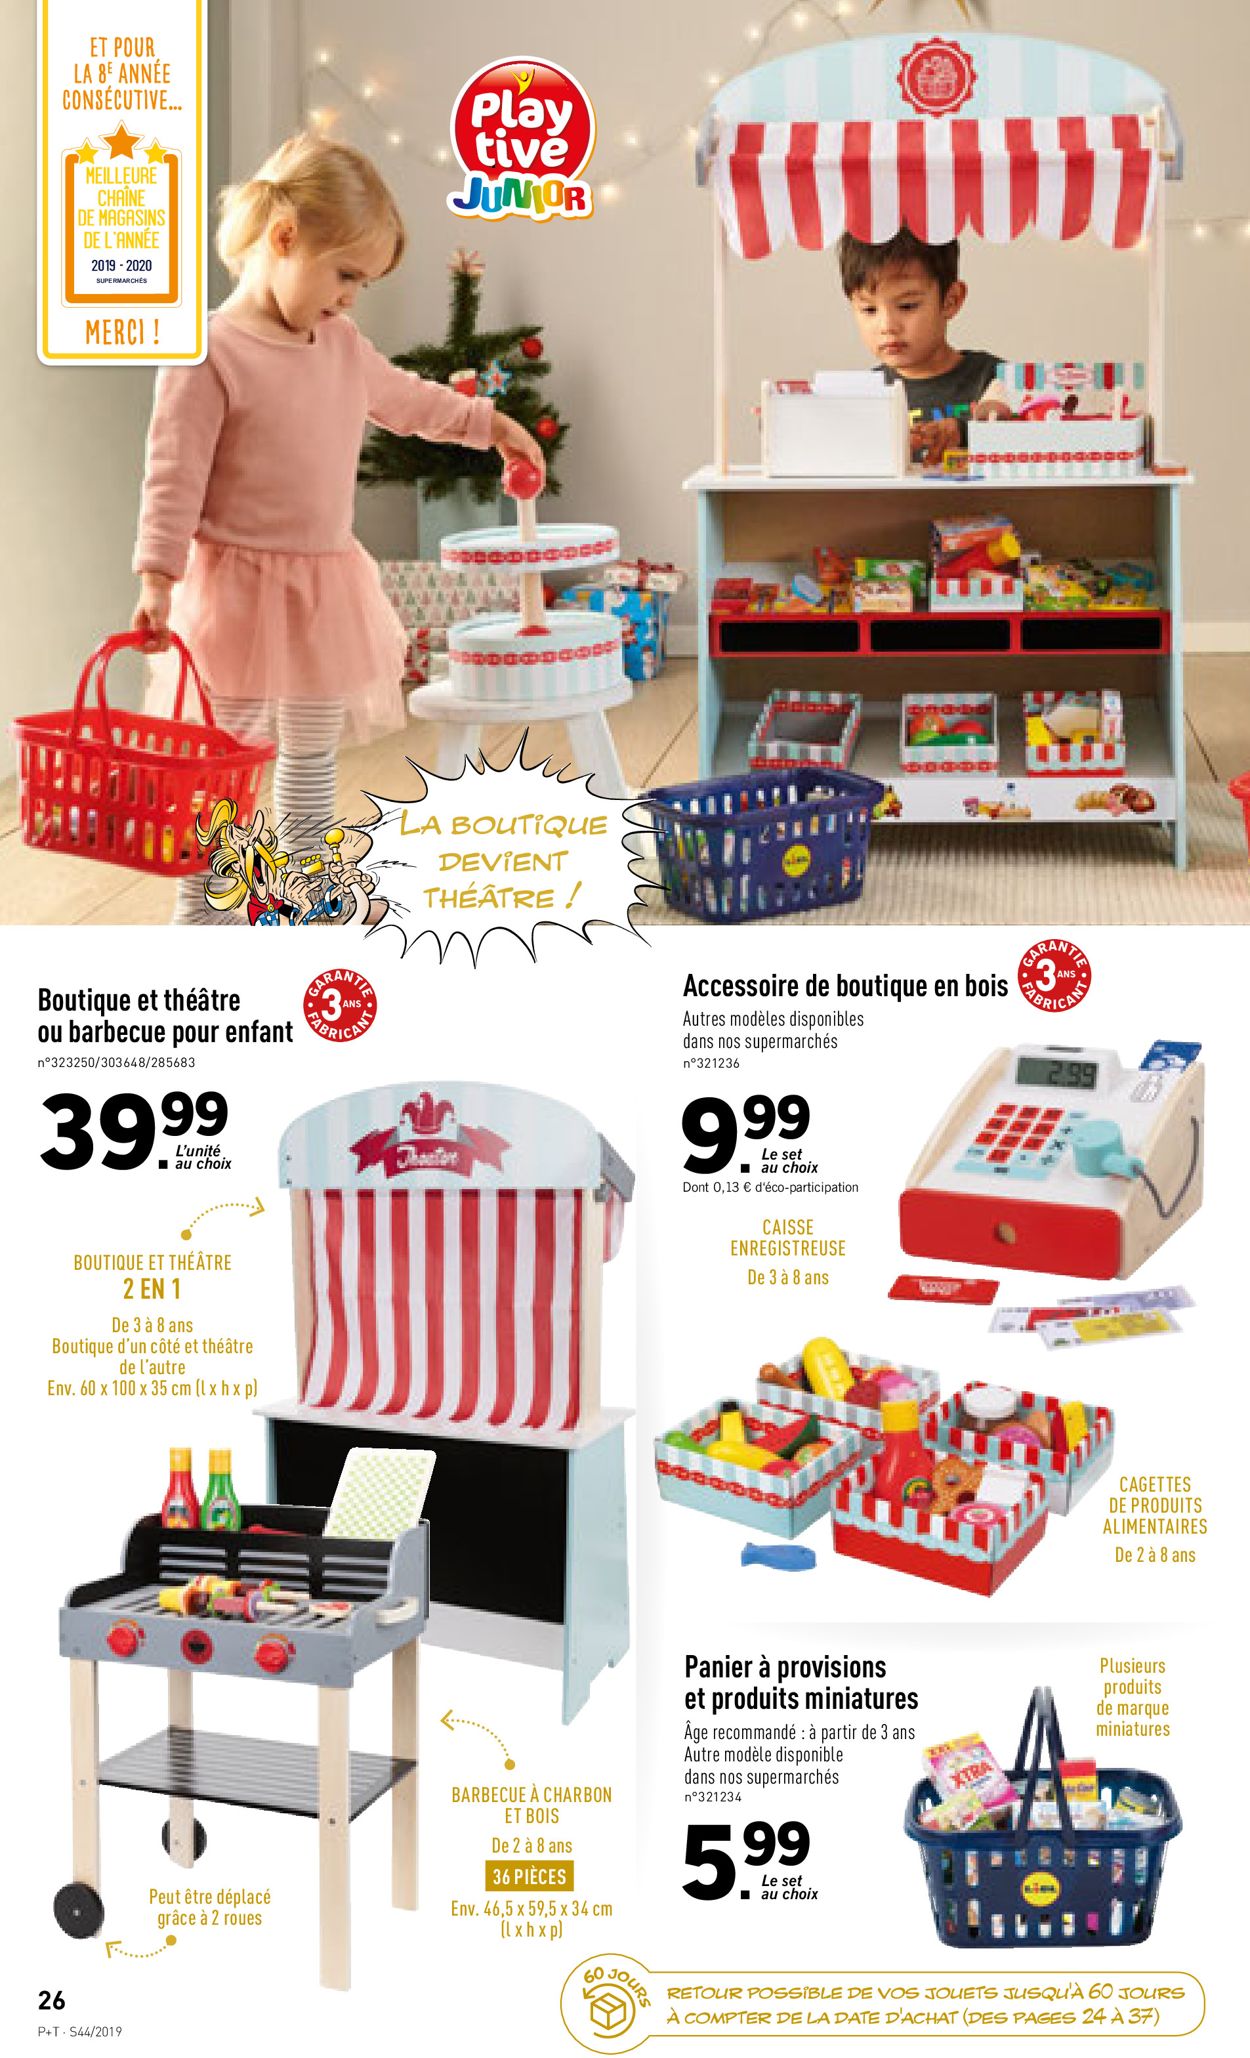 Lidl Catalogue - 30.10-05.11.2019 (Page 26)